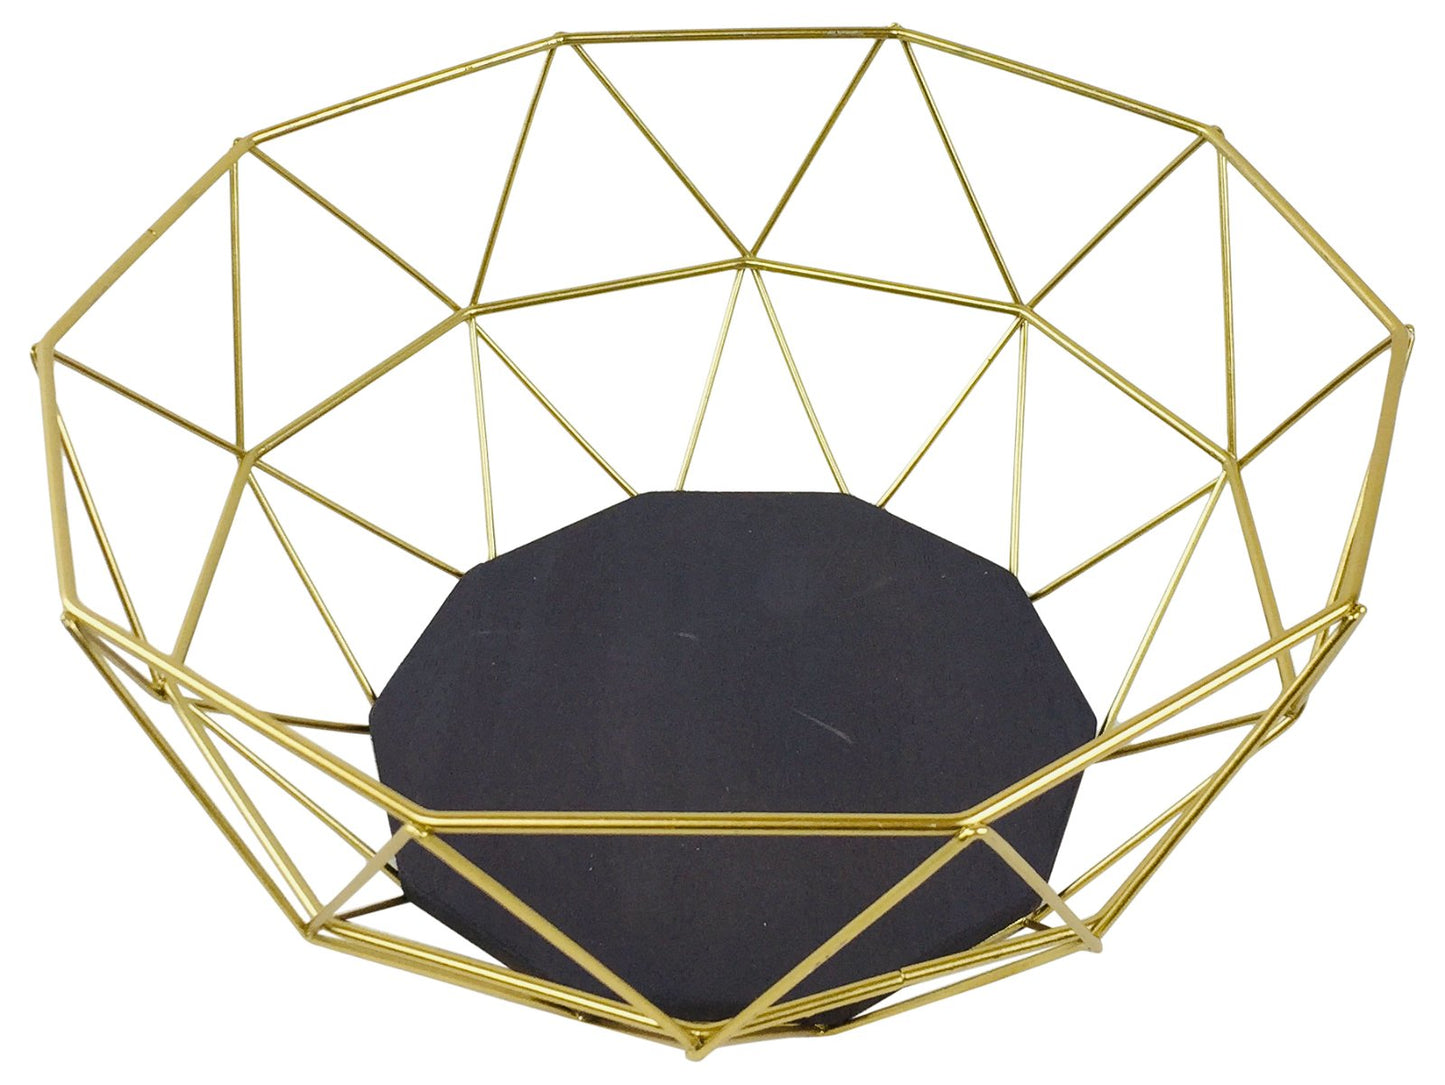 Golden Geometric Style Wire Bowl